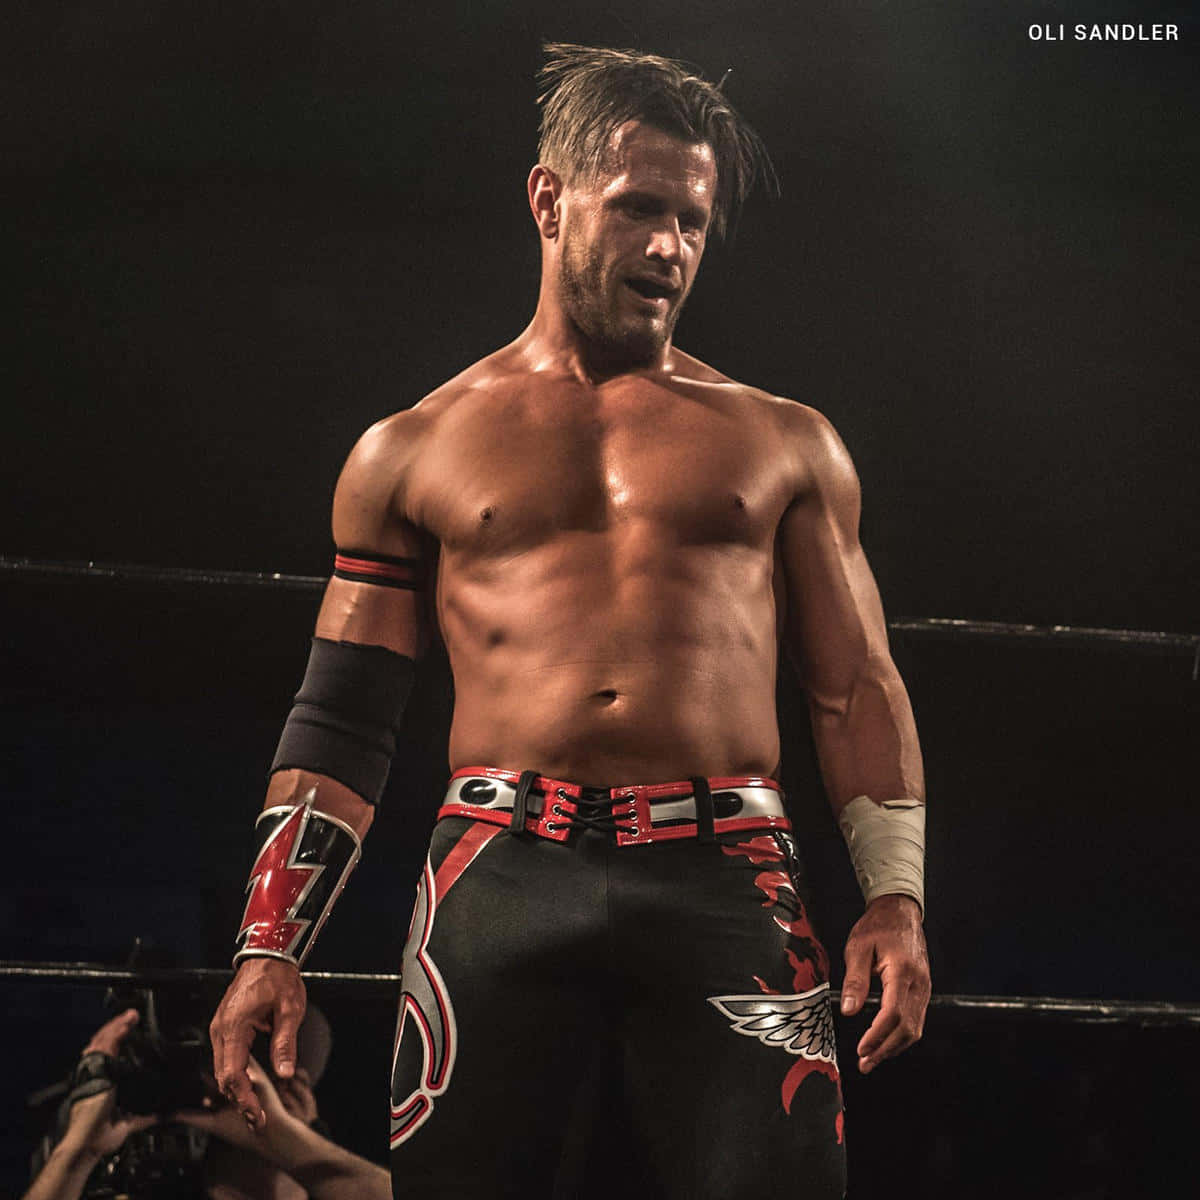 Alexshelley Svettig Look På Impact Wrestling. (this Sentence Doesn't Make Much Sense In Swedish - It's A Direct Translation Of The Original Sentence In English. Do You Have Any Other Sentences That We Could Use As An Example?) Wallpaper